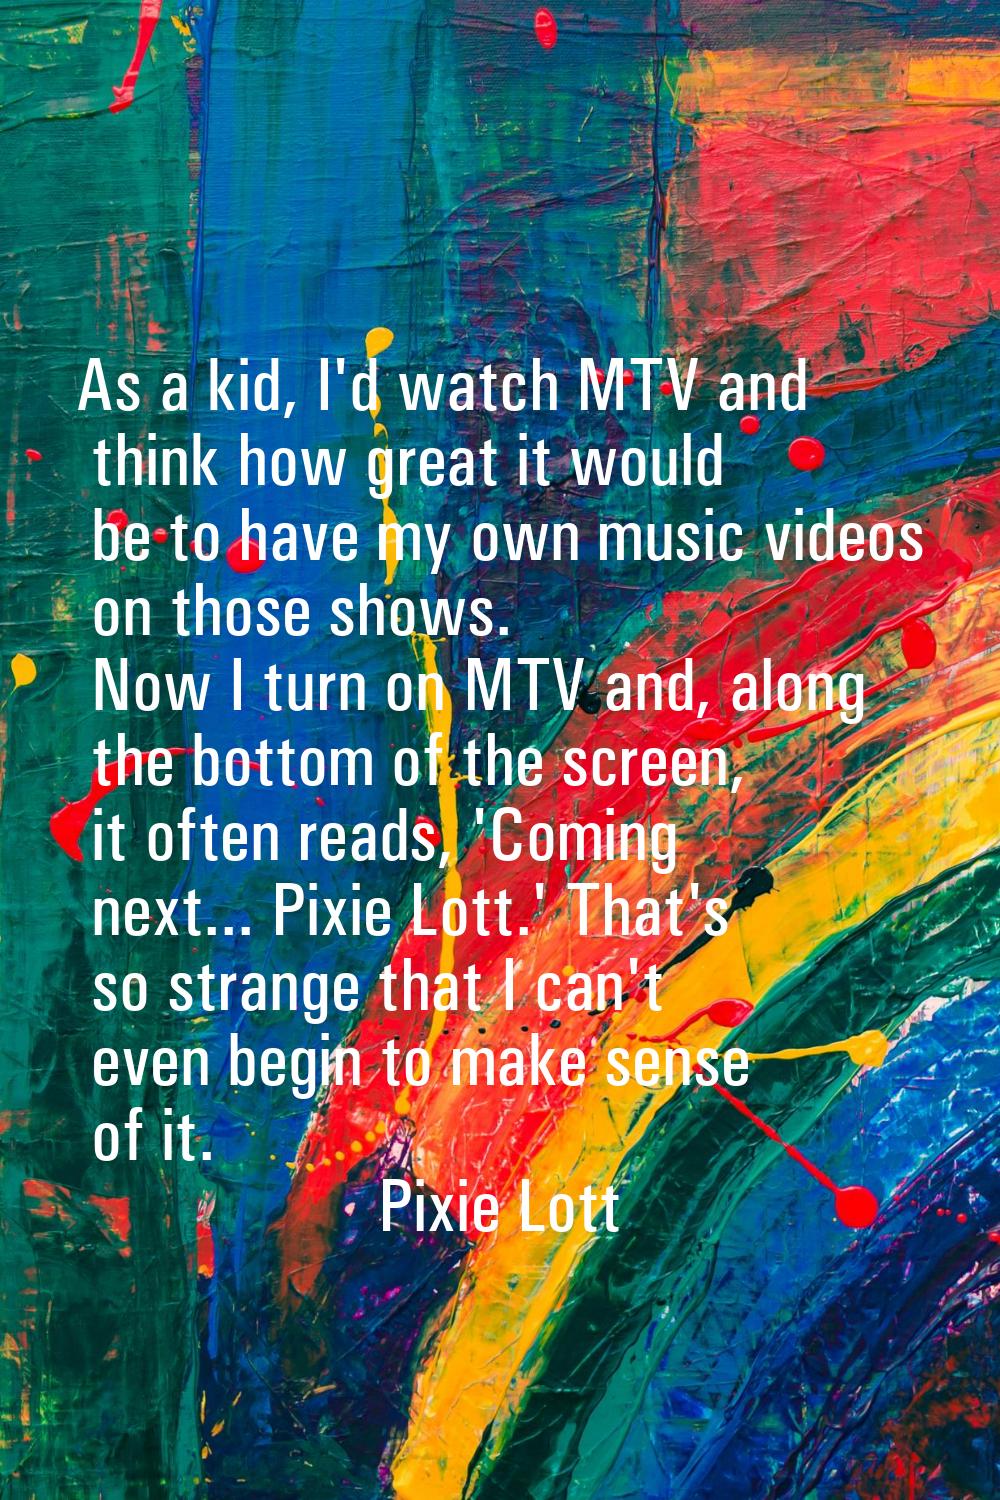 As a kid, I'd watch MTV and think how great it would be to have my own music videos on those shows.